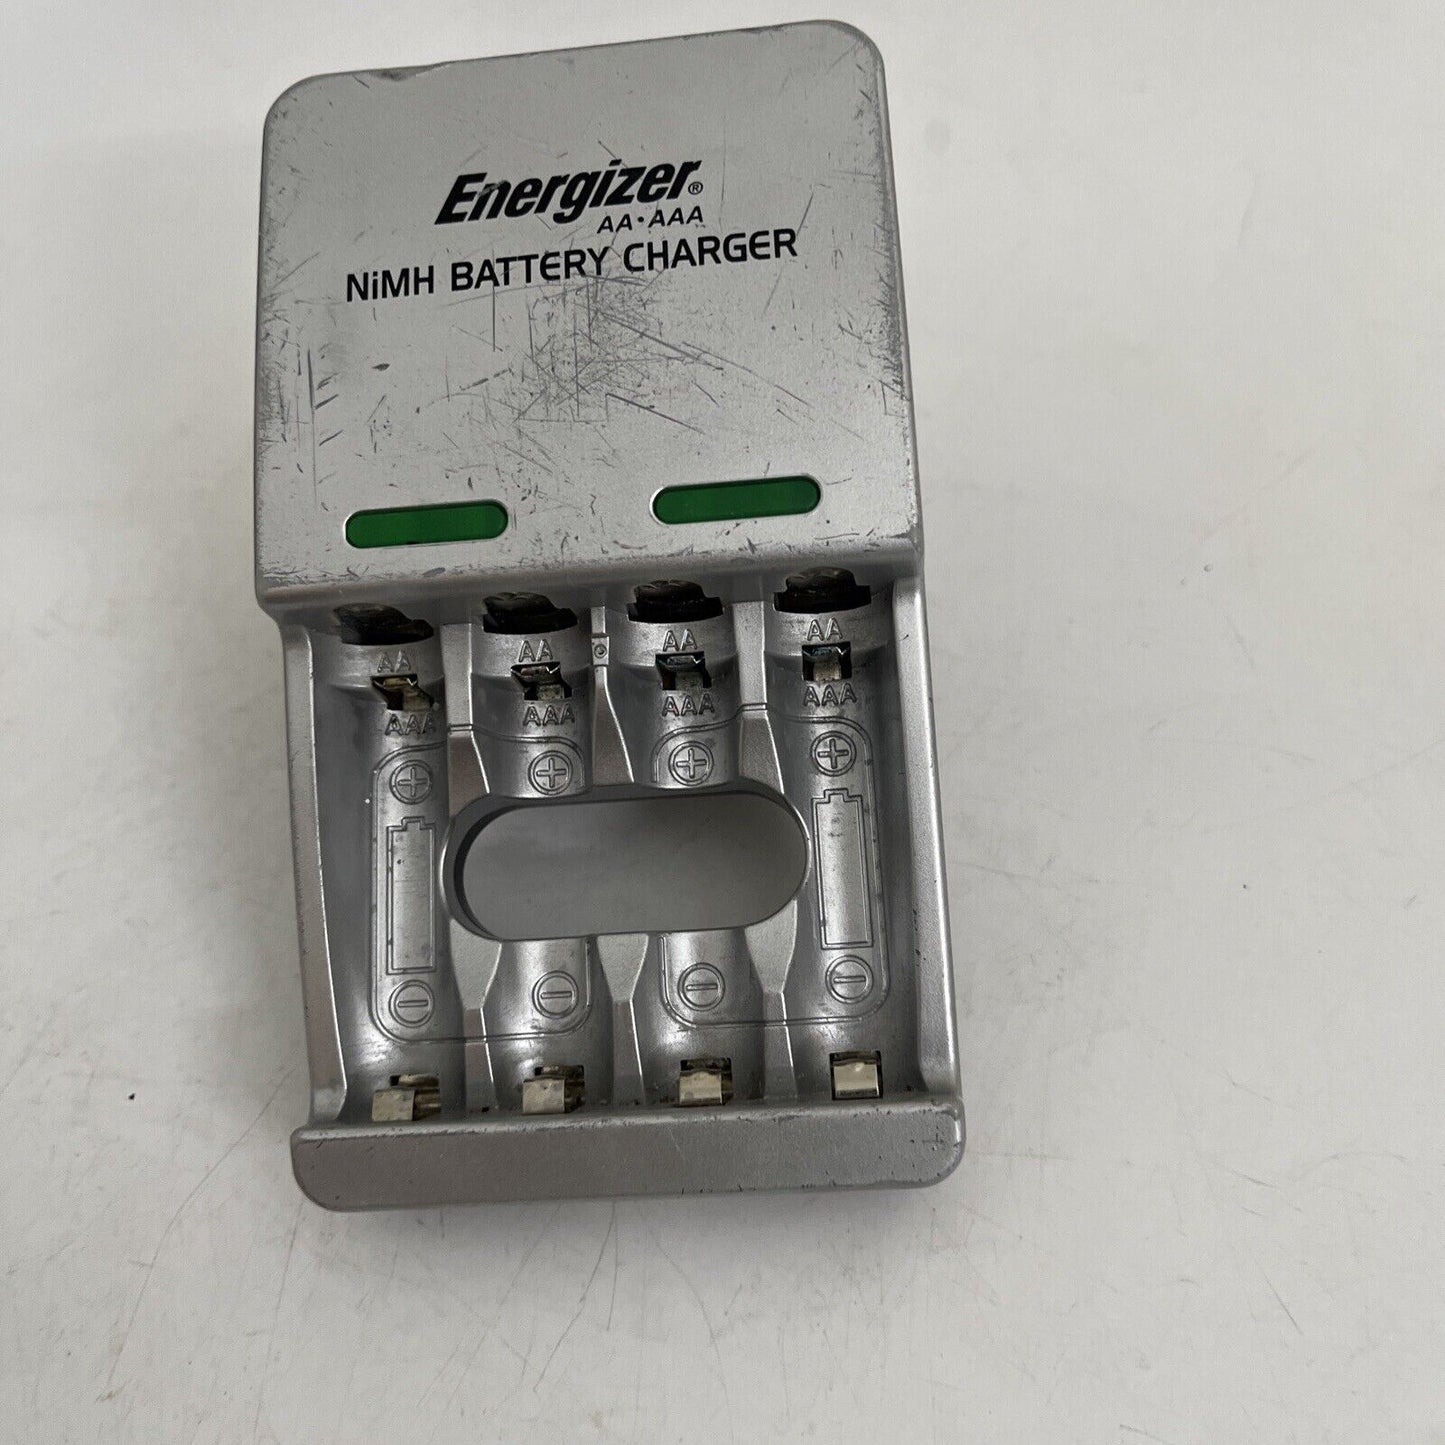 Energizer NiMH Battery Charger AA AAA CHVCM-NZ